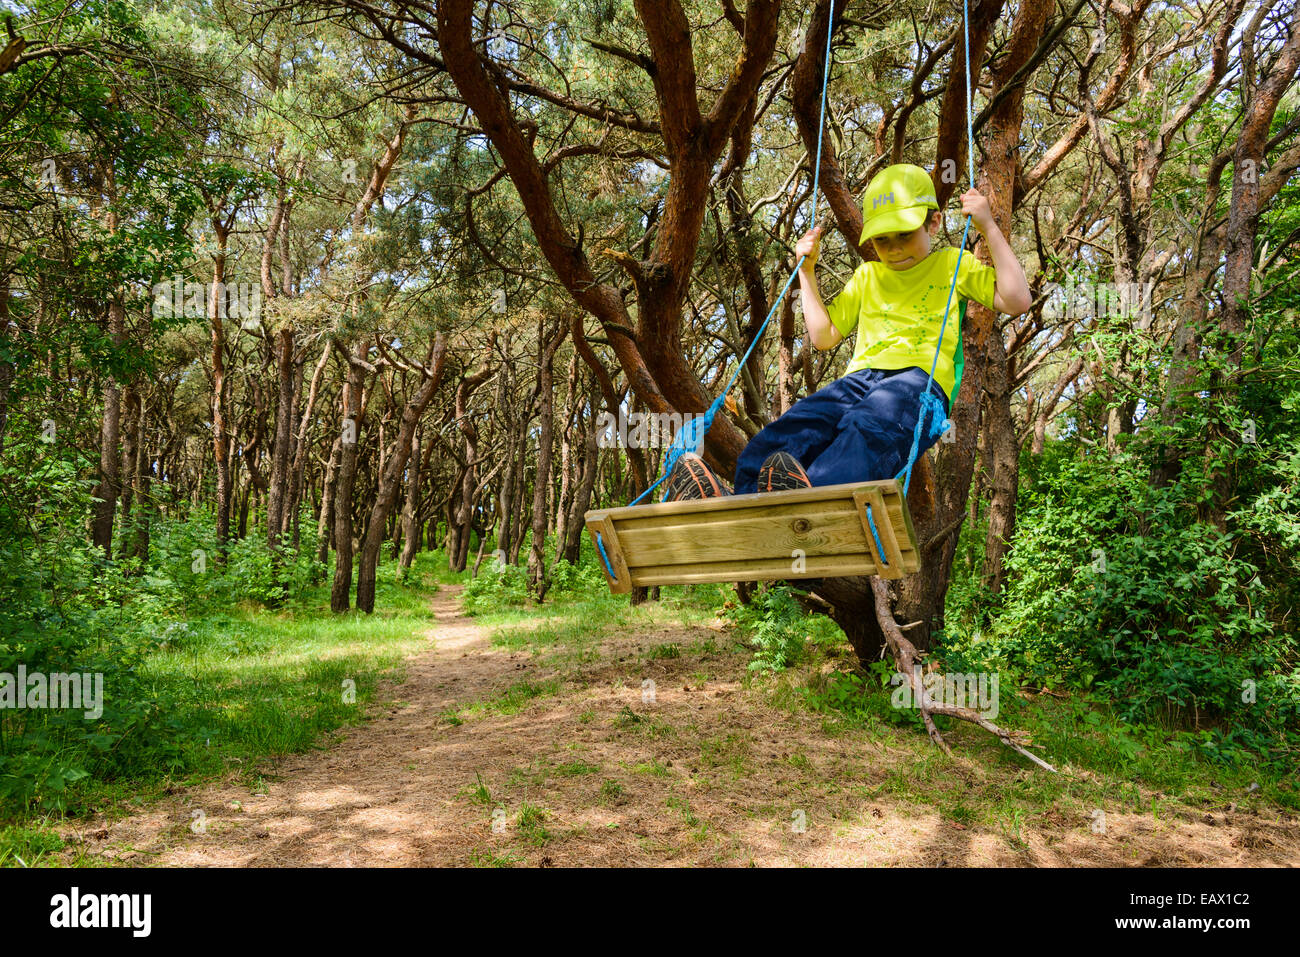 Young boy swings on a wooden swing in a forest Stock Photo